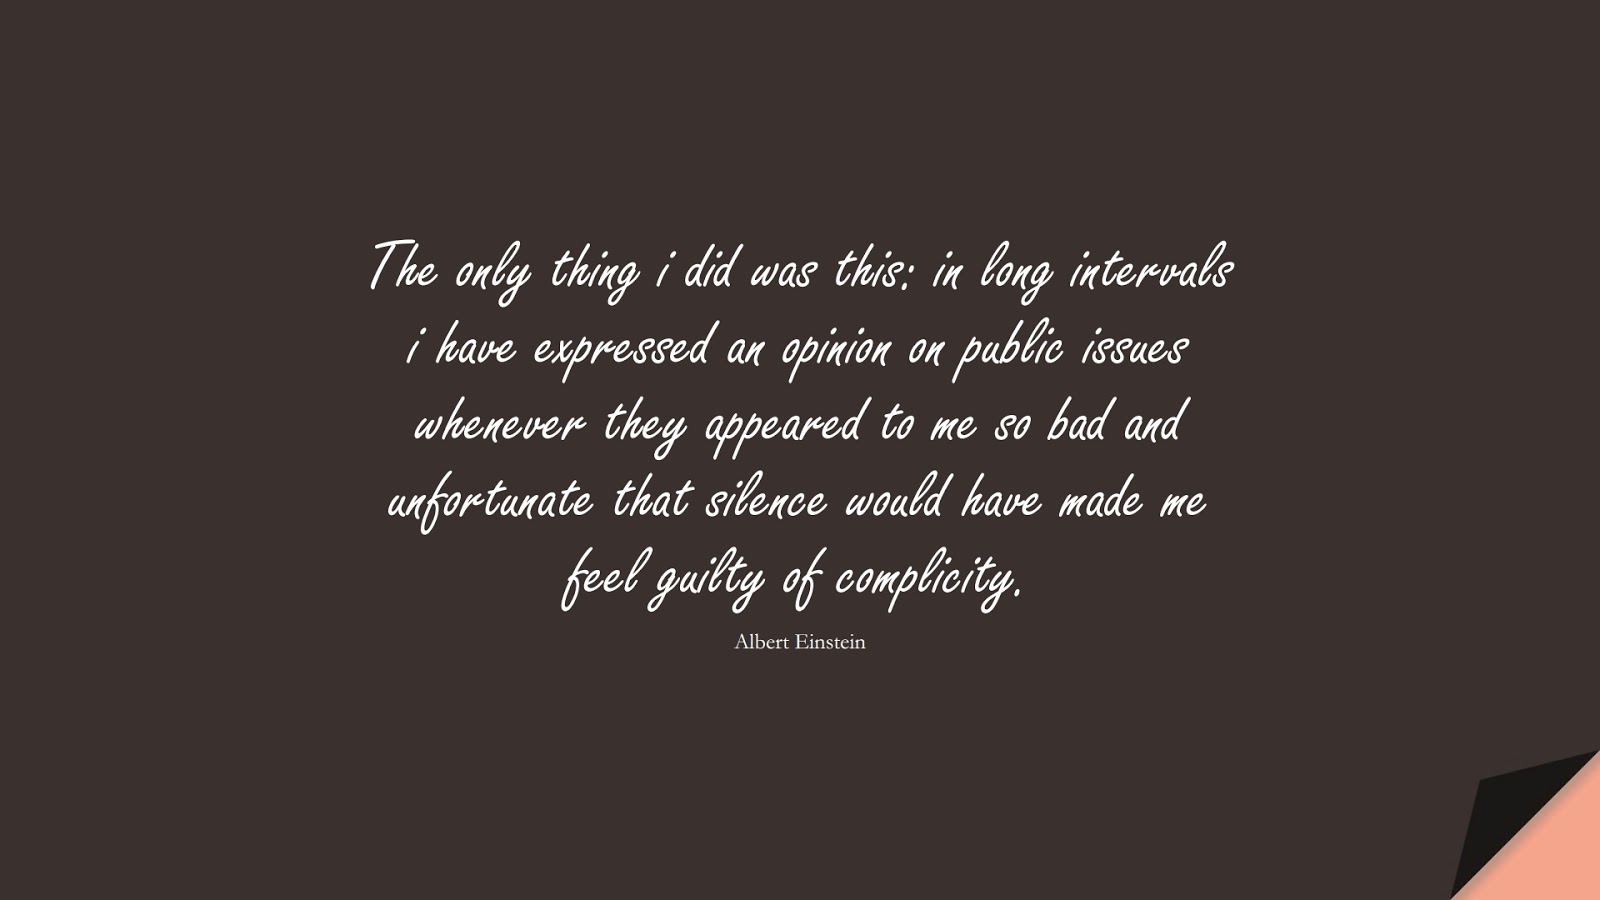 The only thing i did was this: in long intervals i have expressed an opinion on public issues whenever they appeared to me so bad and unfortunate that silence would have made me feel guilty of complicity. (Albert Einstein);  #AlbertEnsteinQuotes